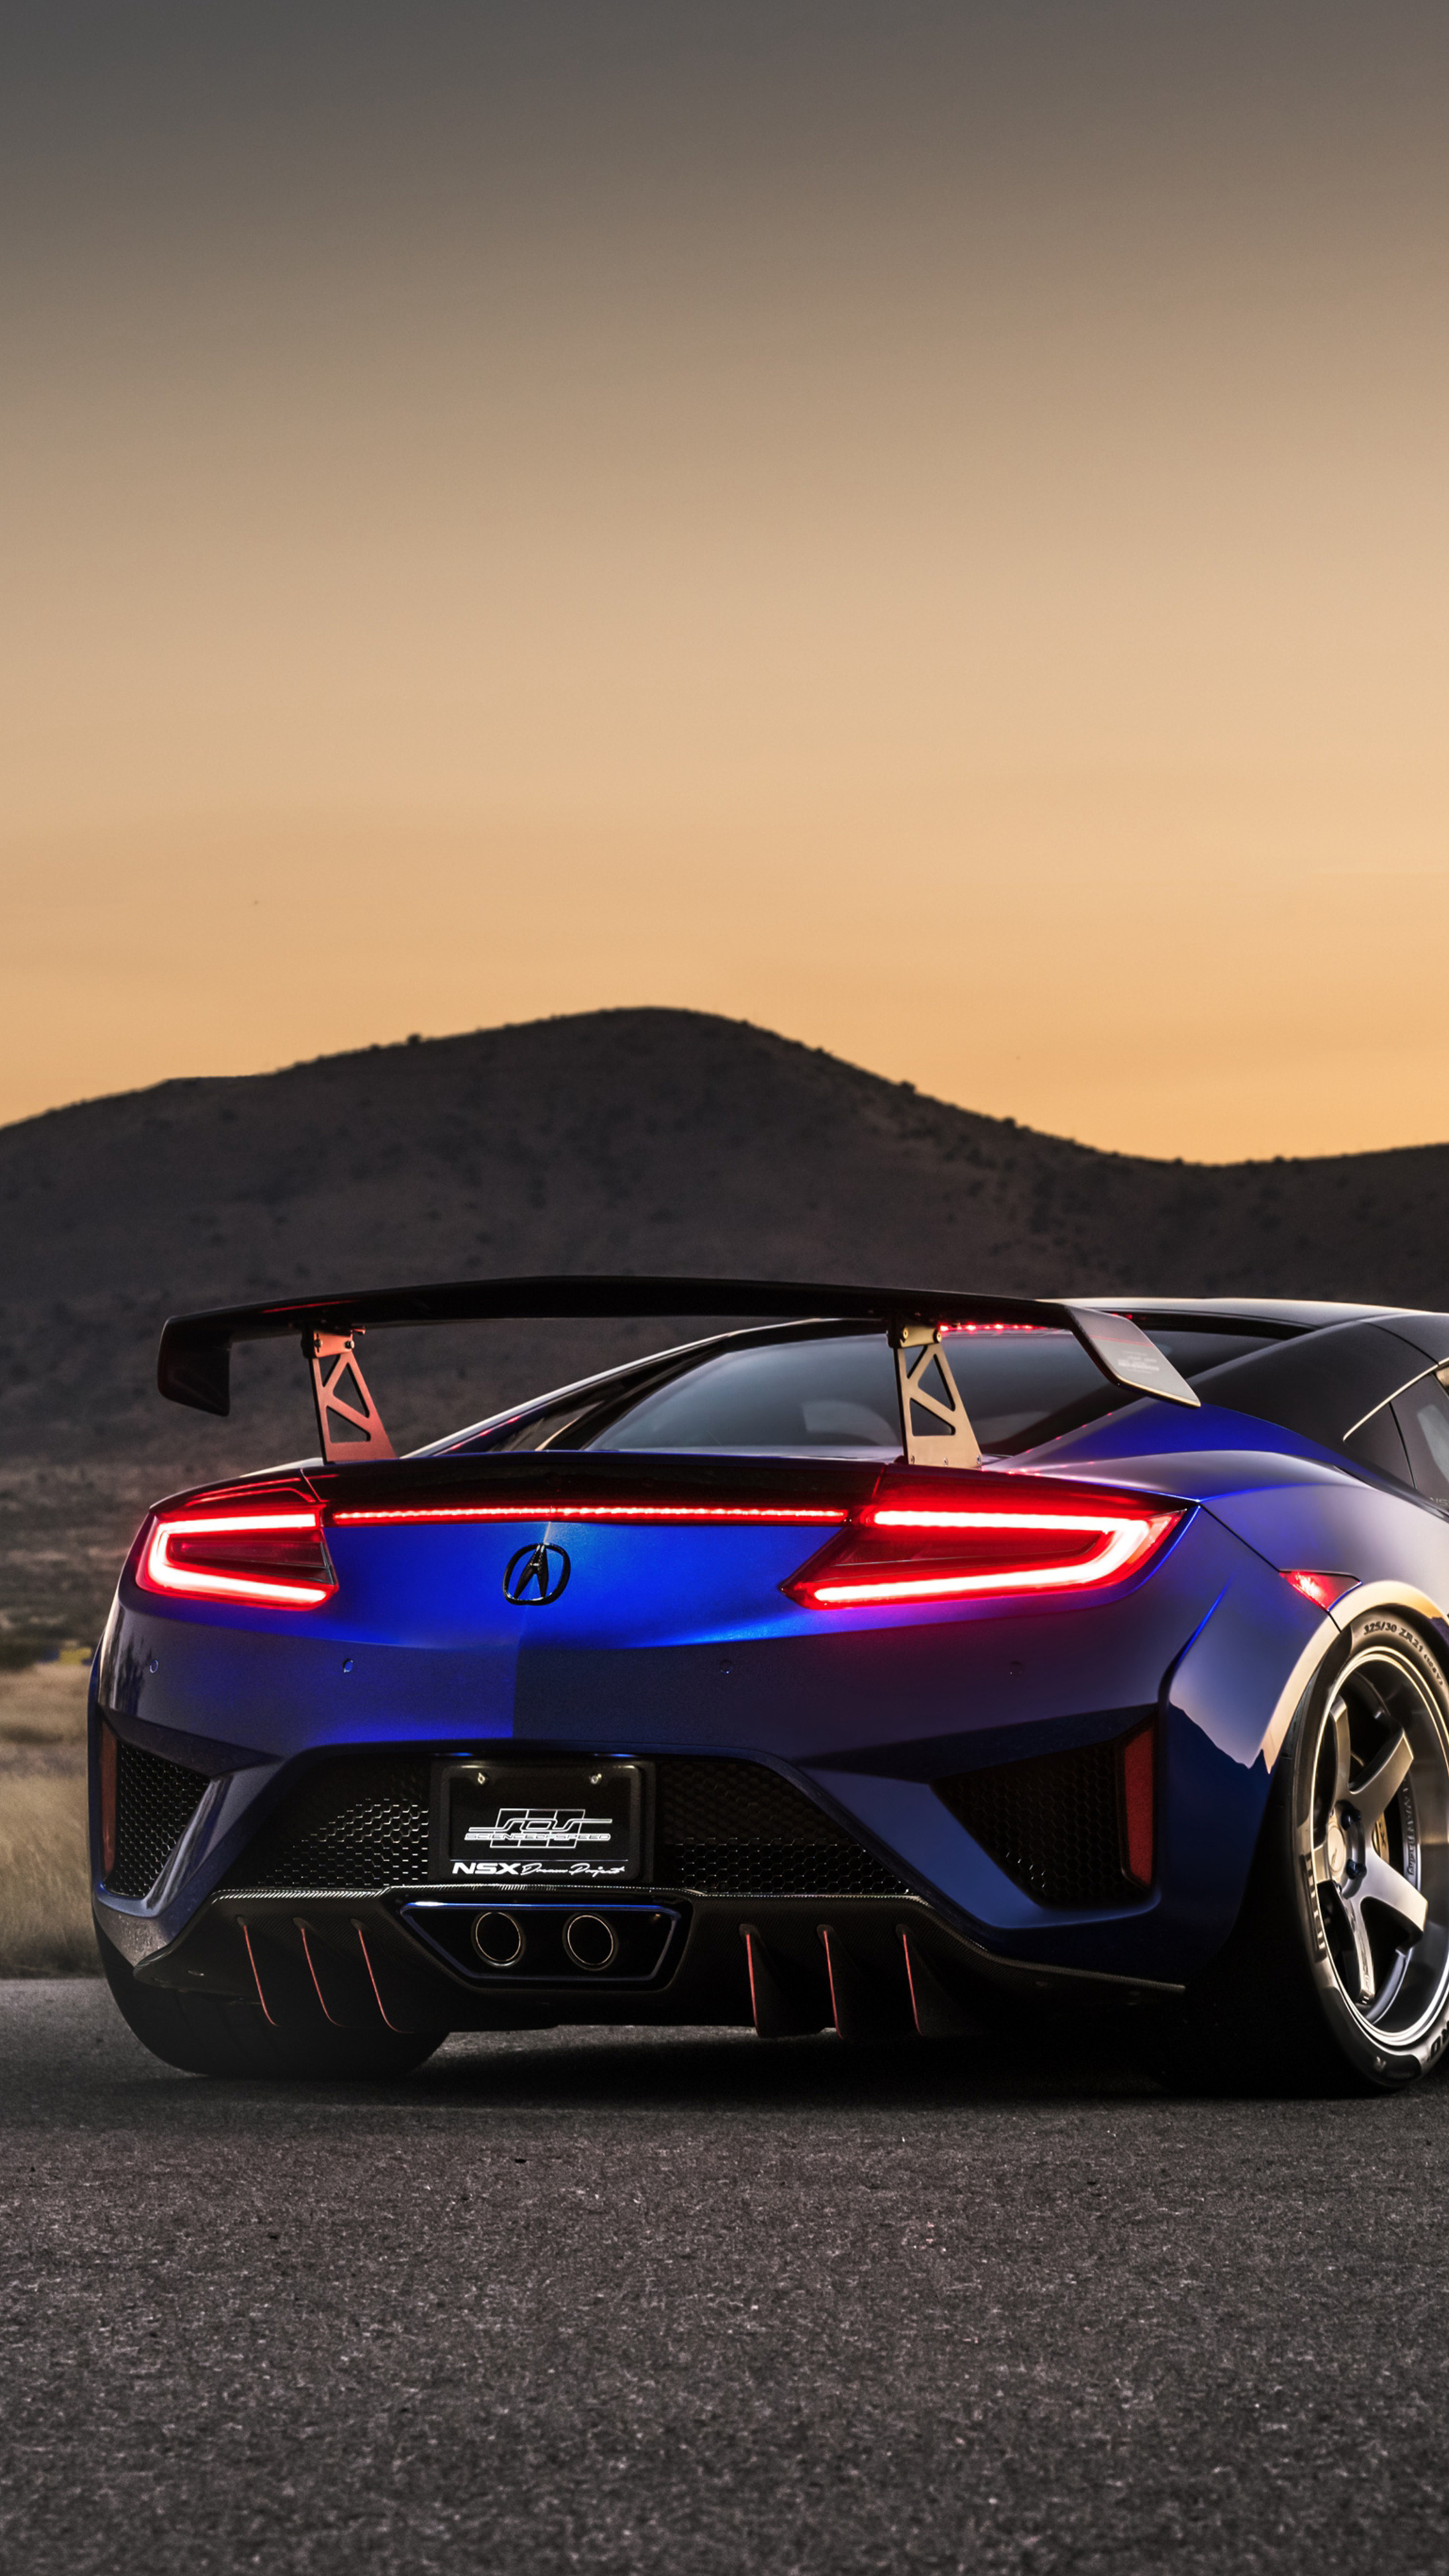 Acura NSX ScienceofSpeed Dream Project, Premium HD 4K wallpapers, Xperia X, 2160x3840 4K Phone